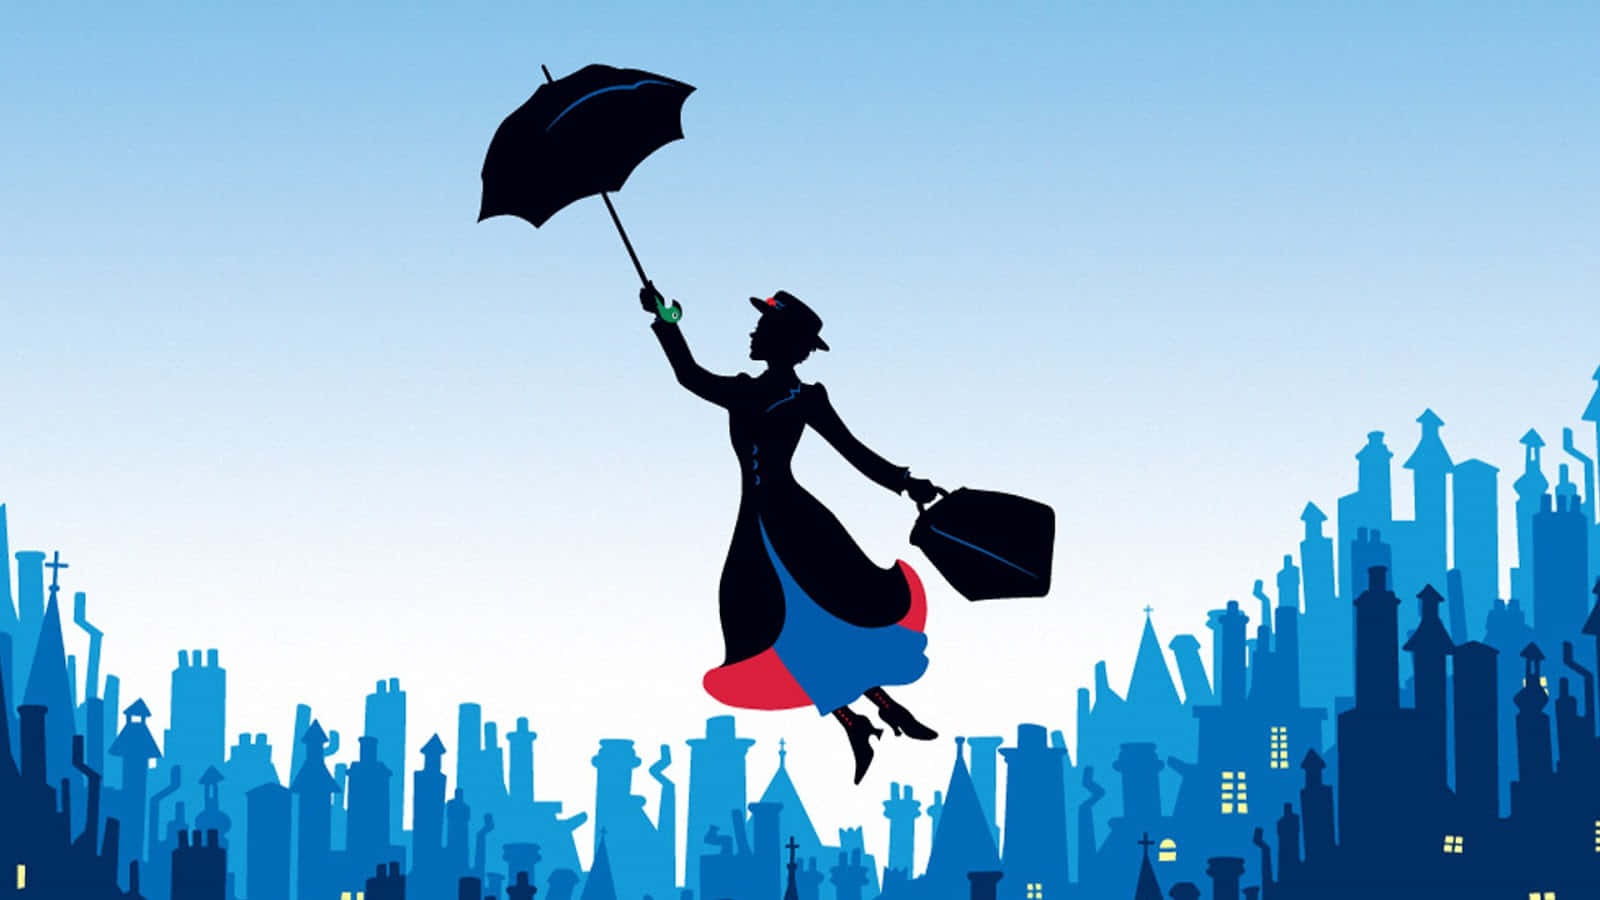 Captivating Mary Poppins Wallpaper Background